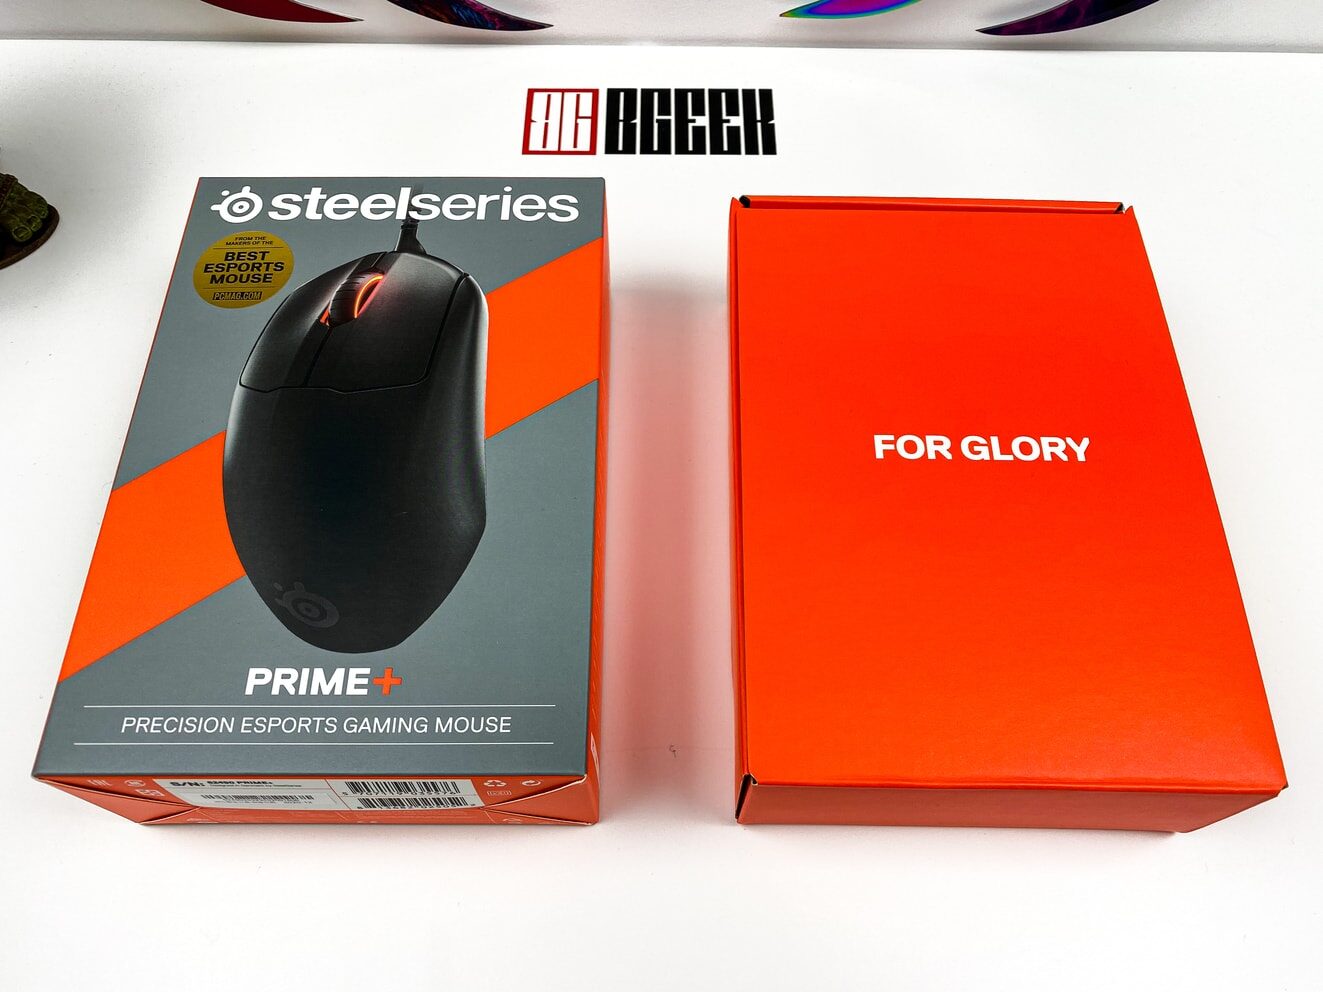 Feature image for Steelseries Prime+ review. The box of the Prime+ and inner box with for glory on it.